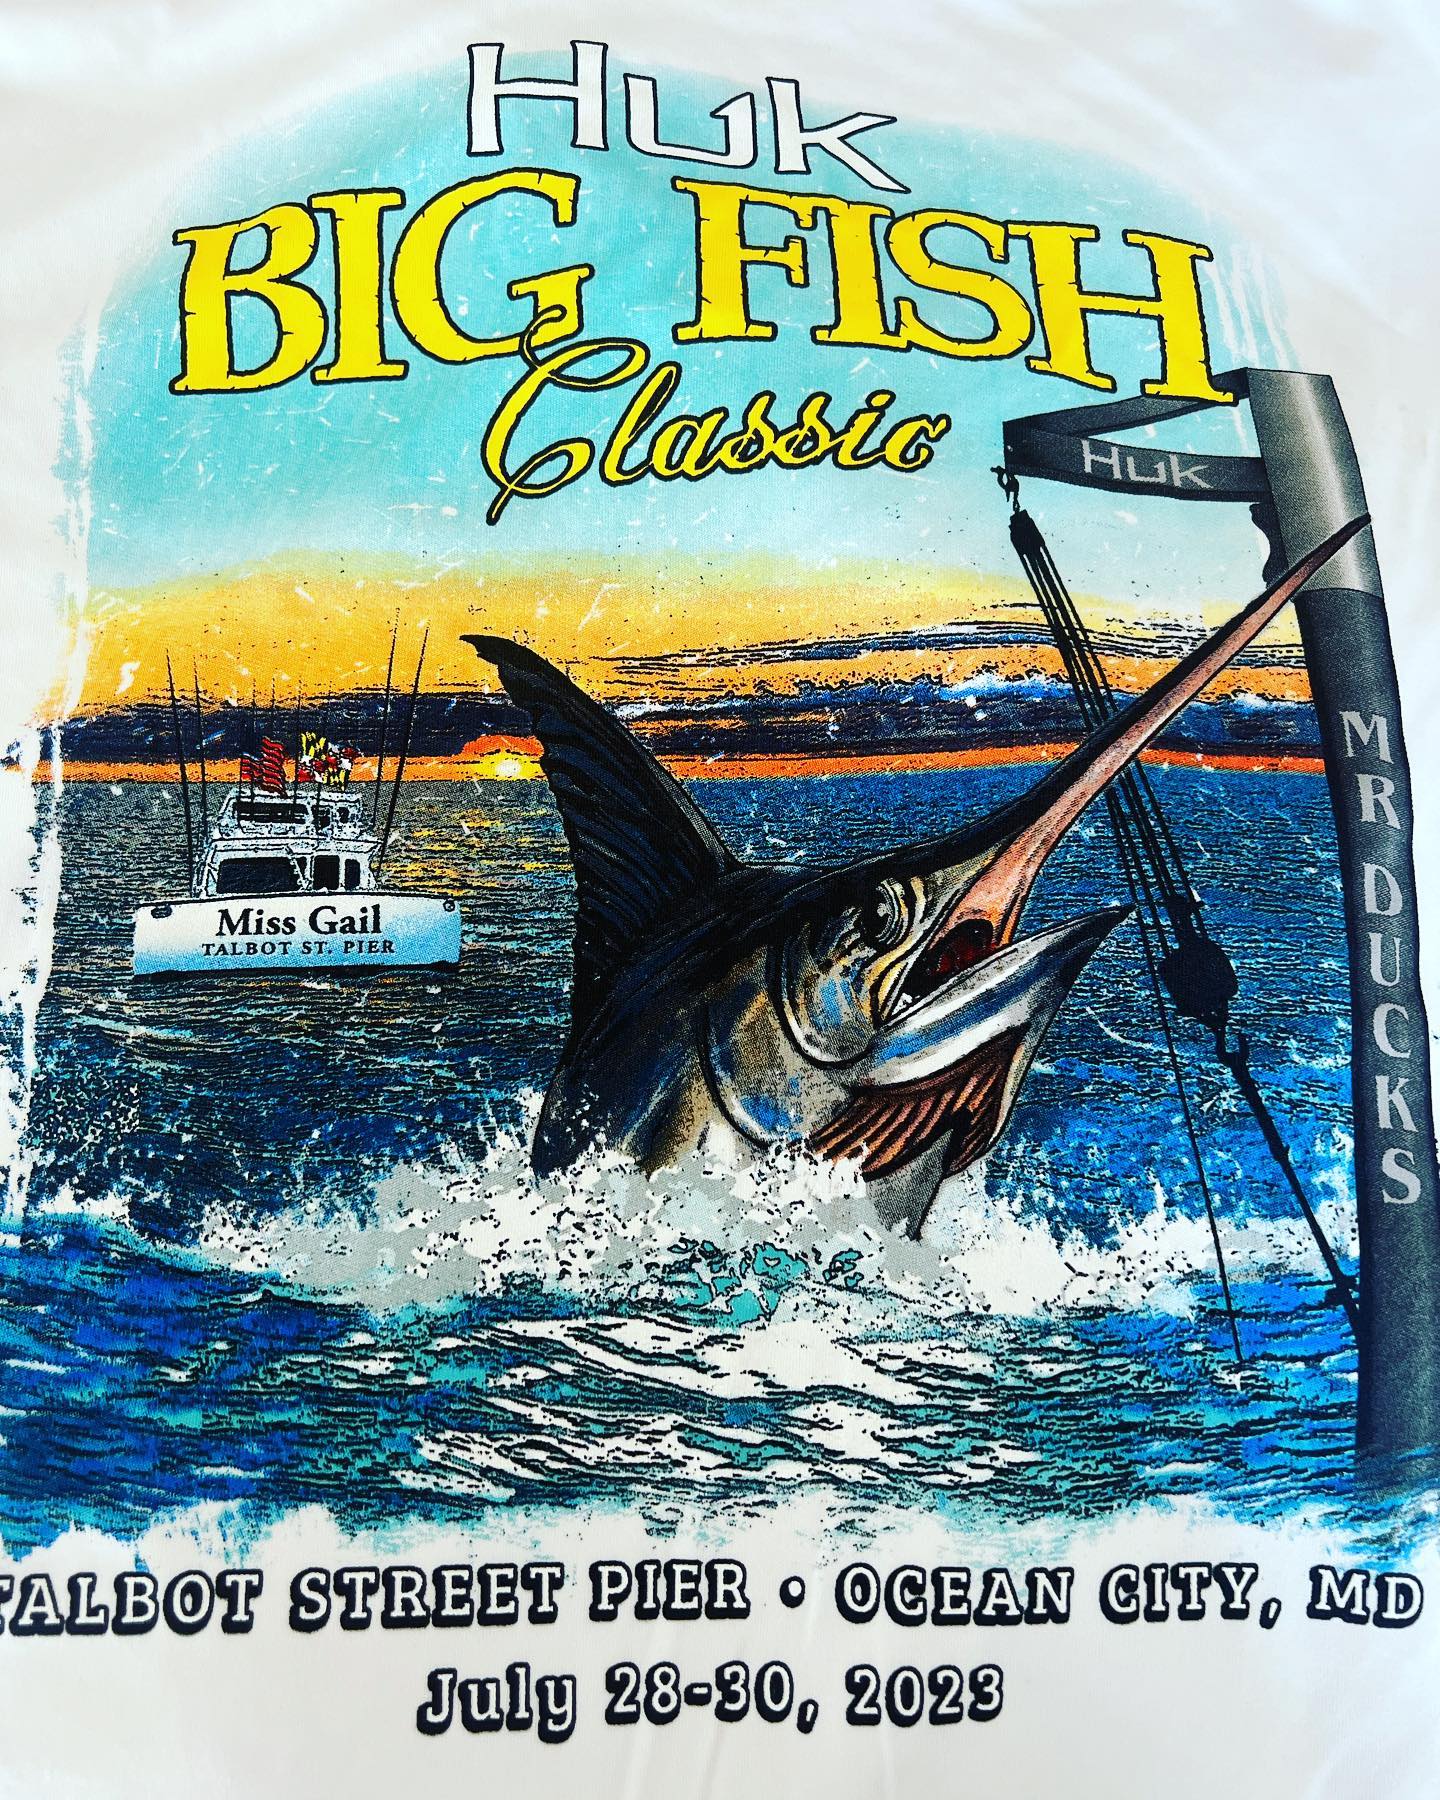 2023 Big Fish Classic Has 69 Boats and $746,000 Purse